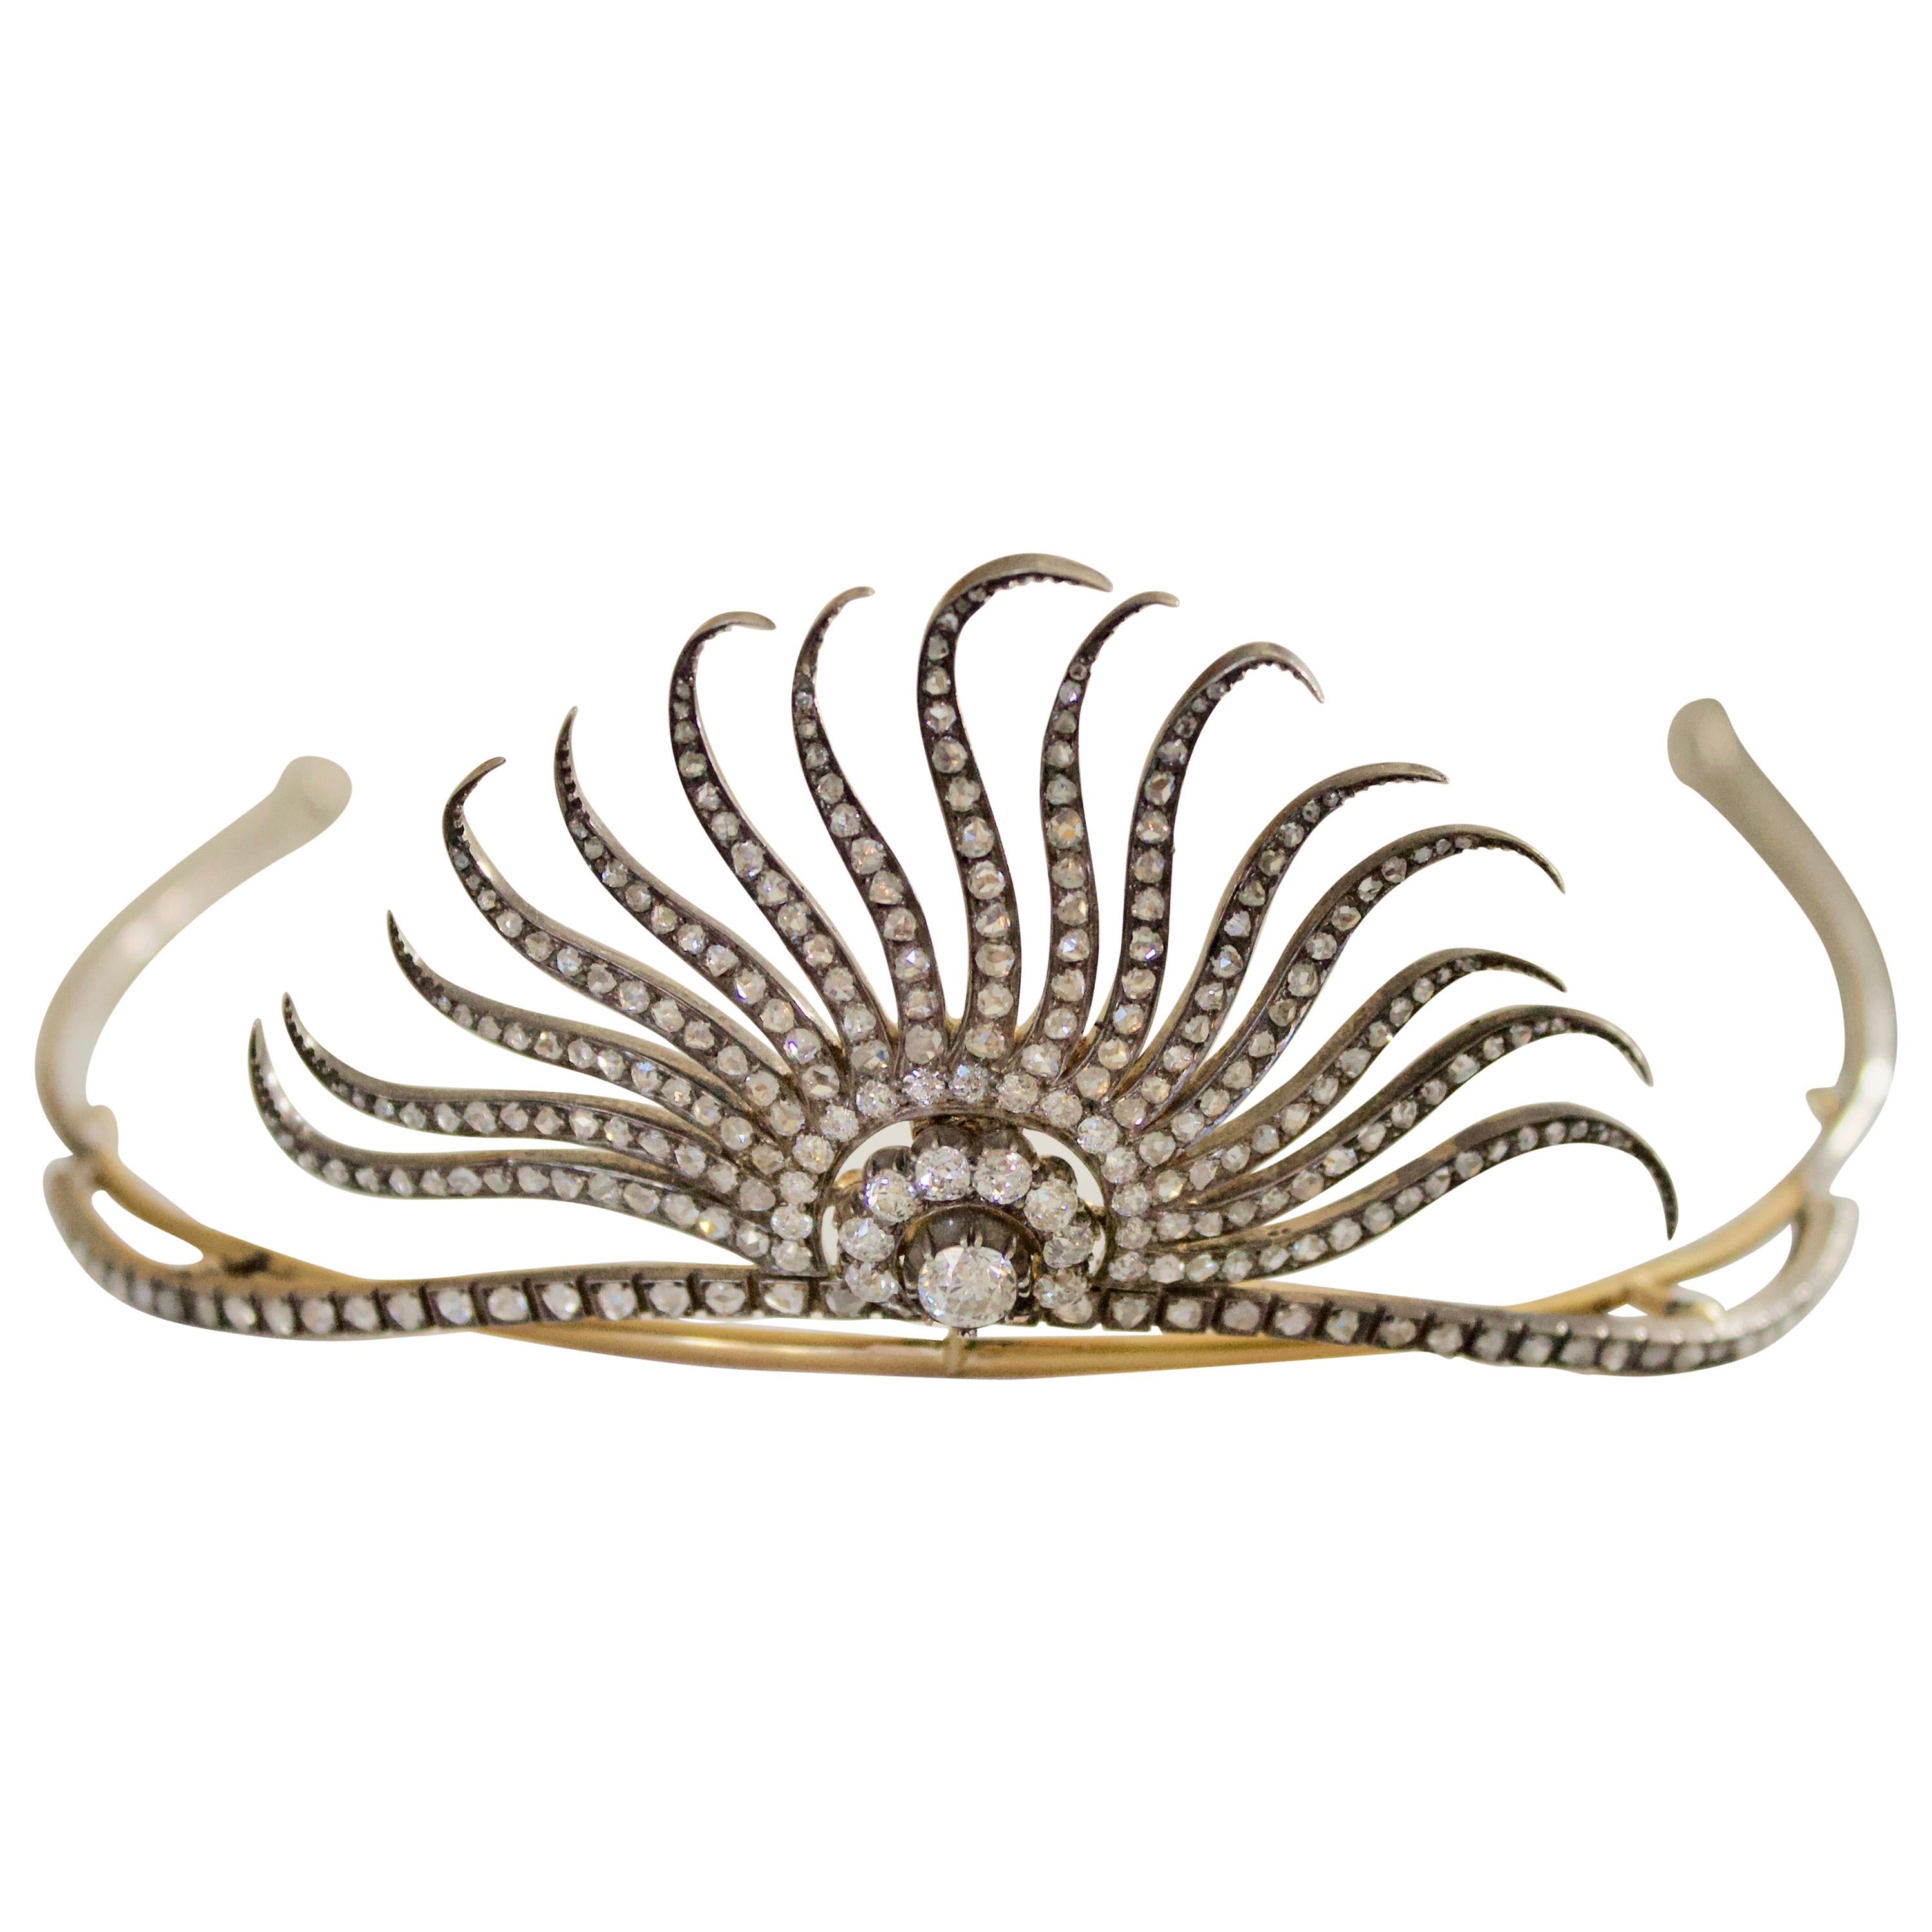 Diamond Tiara in Yellow Gold and Silver 7.10 Carat circa 1890 for Royalty Only